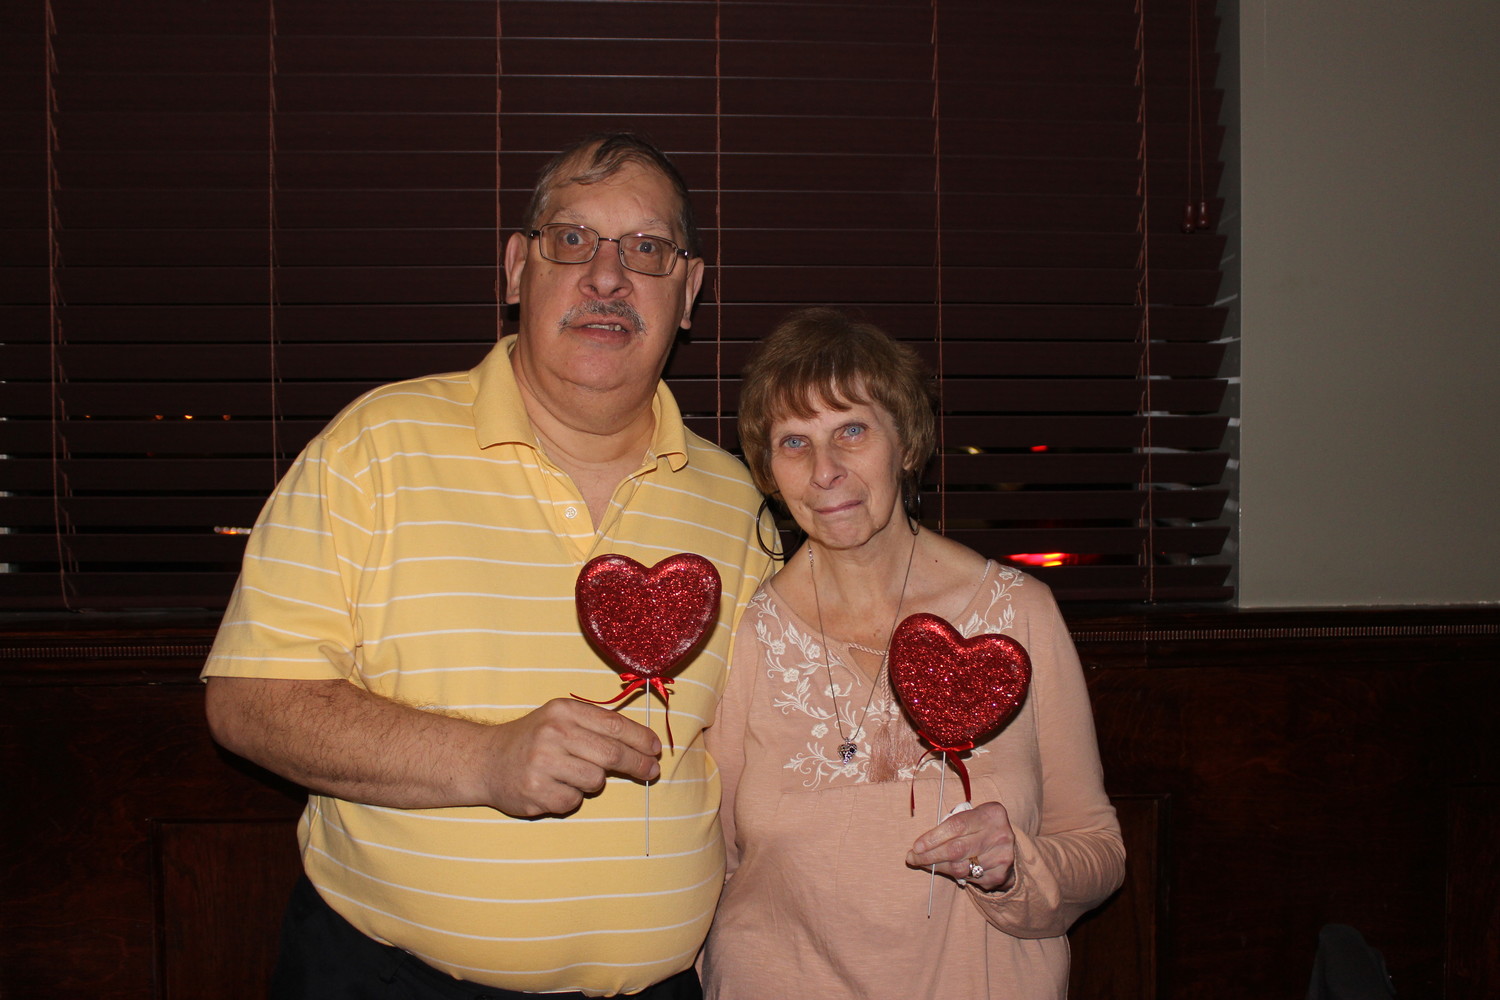 Tim Amato, 59, and his wife Sharon, 53, both live in the AHRC Nassau’s residential program in Rockville Center and attended its sixth annual “Date Night” at Borelli’s on Feb. 7.